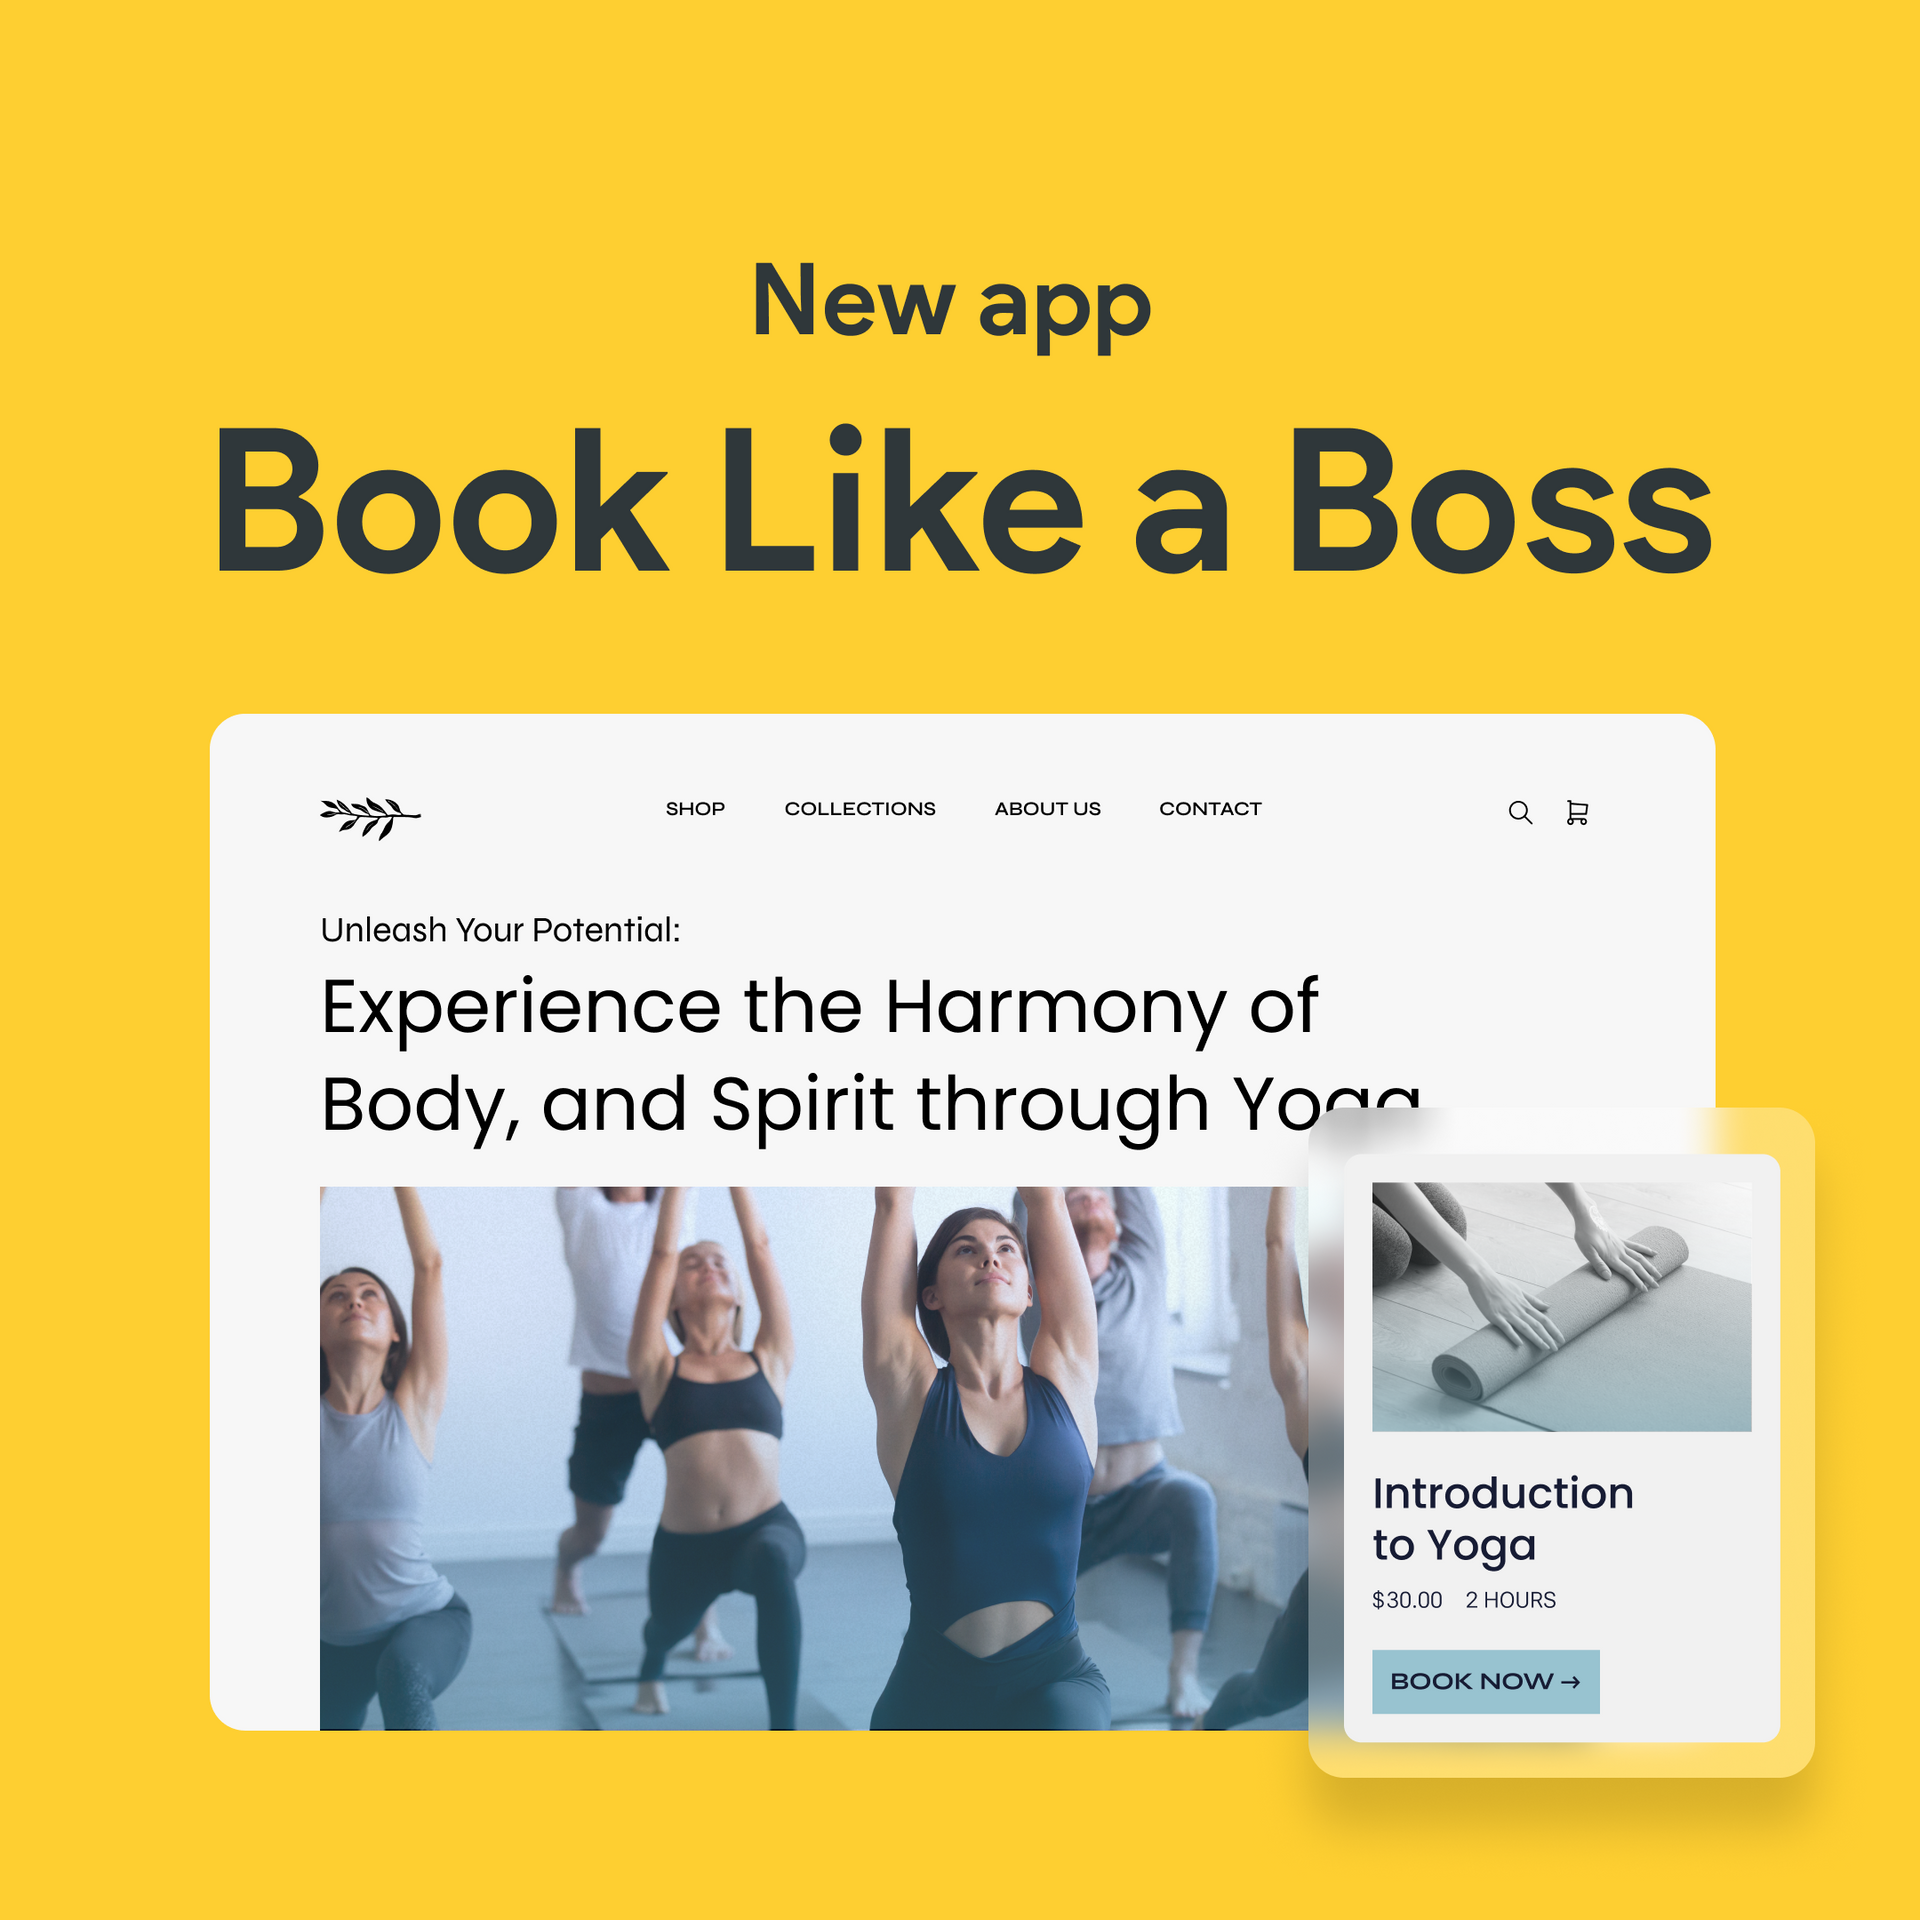 Booking app Book Like a Boss now available in the Duda App Store